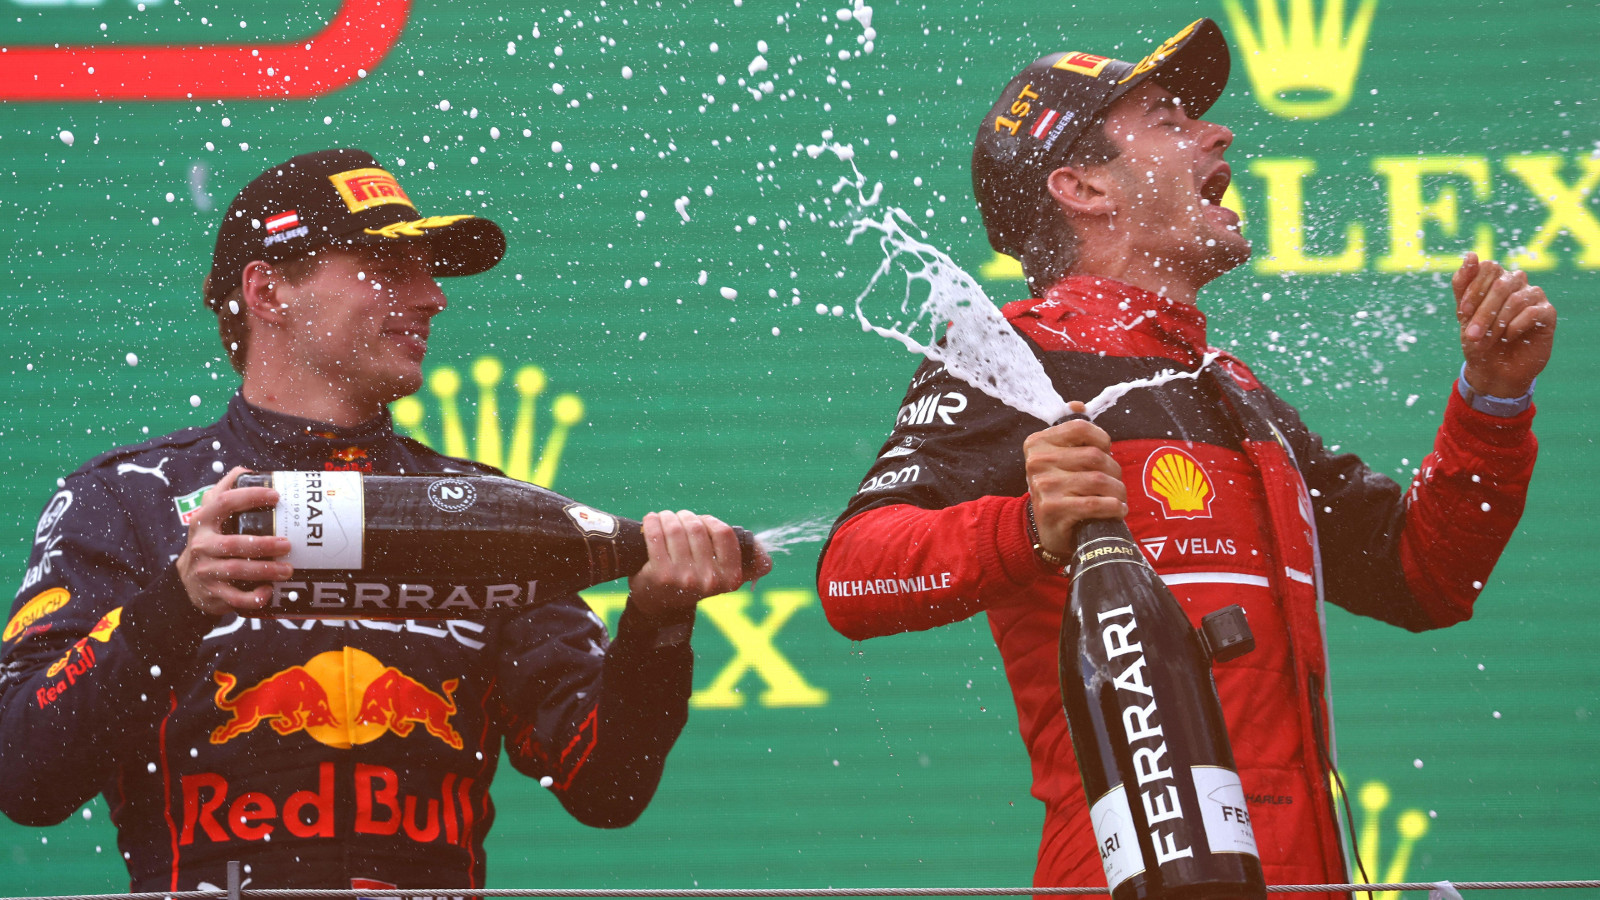 Red Bull's Max Verstappen and Ferrari's Charles Leclerc on the podium at the Austrian Grand Prix. Spielberg, July 2022.